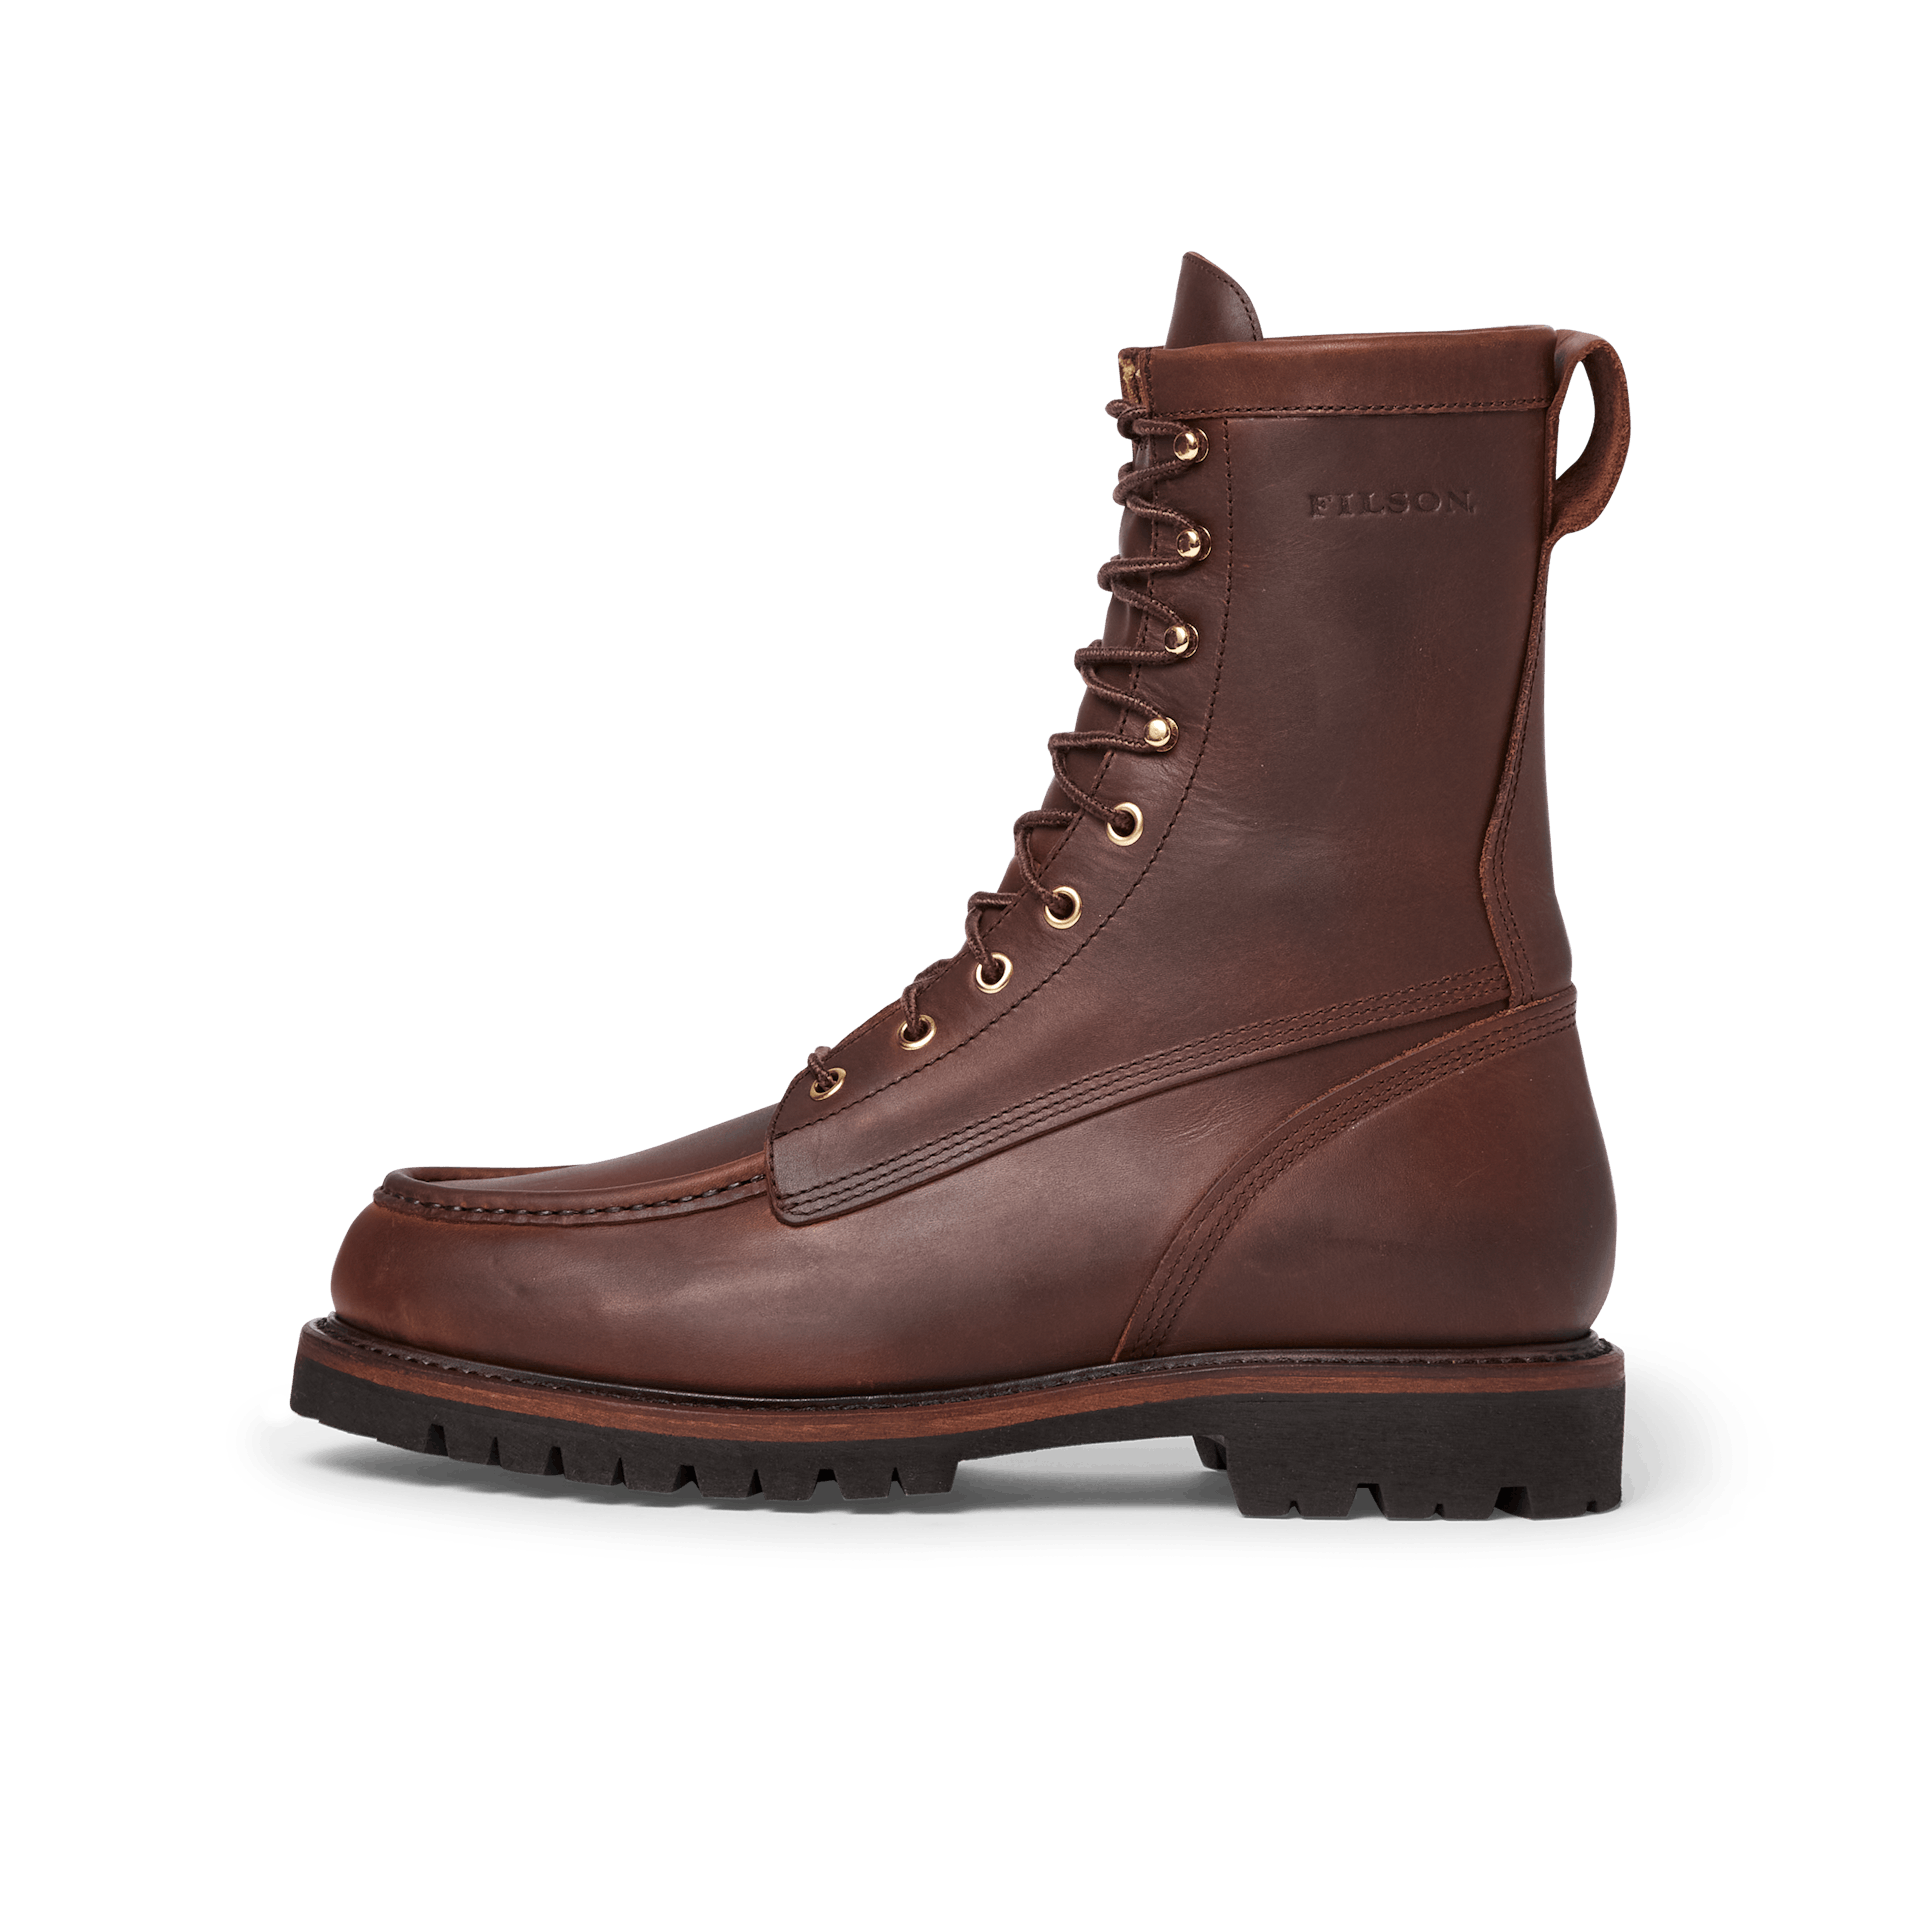 Men's Uplander Boots — Leather Hunting Boots Filson